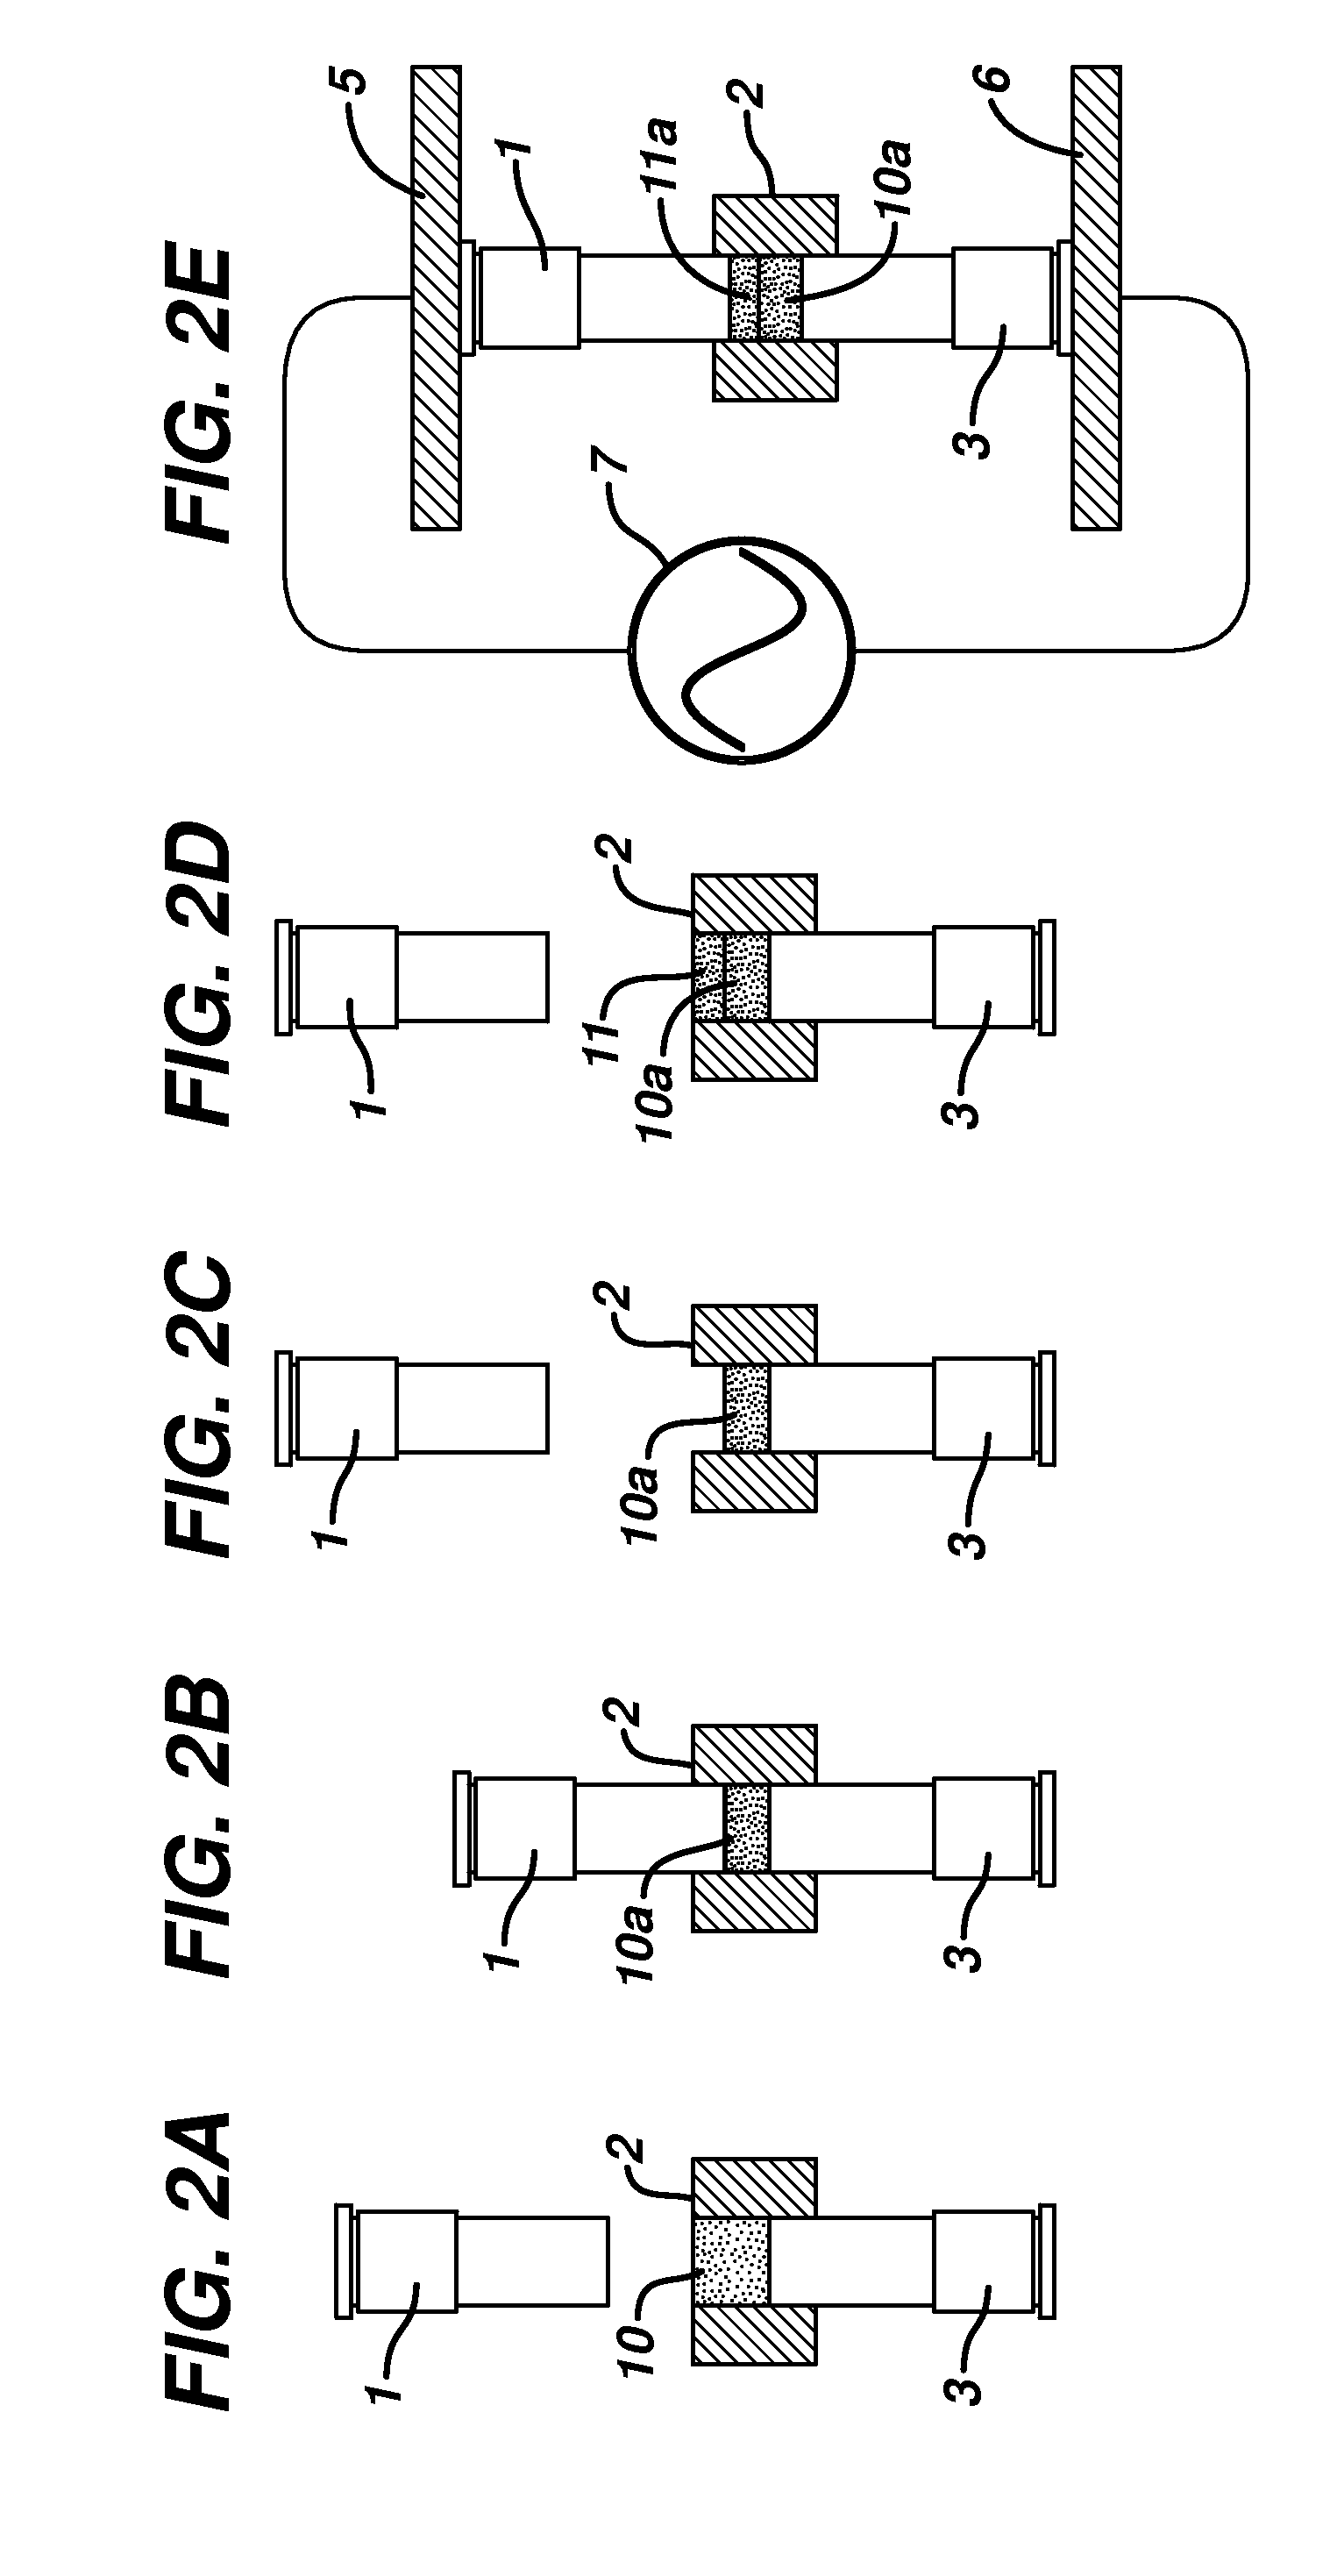 Machine for the manufacture of dosage forms utilizing radiofrequency energy